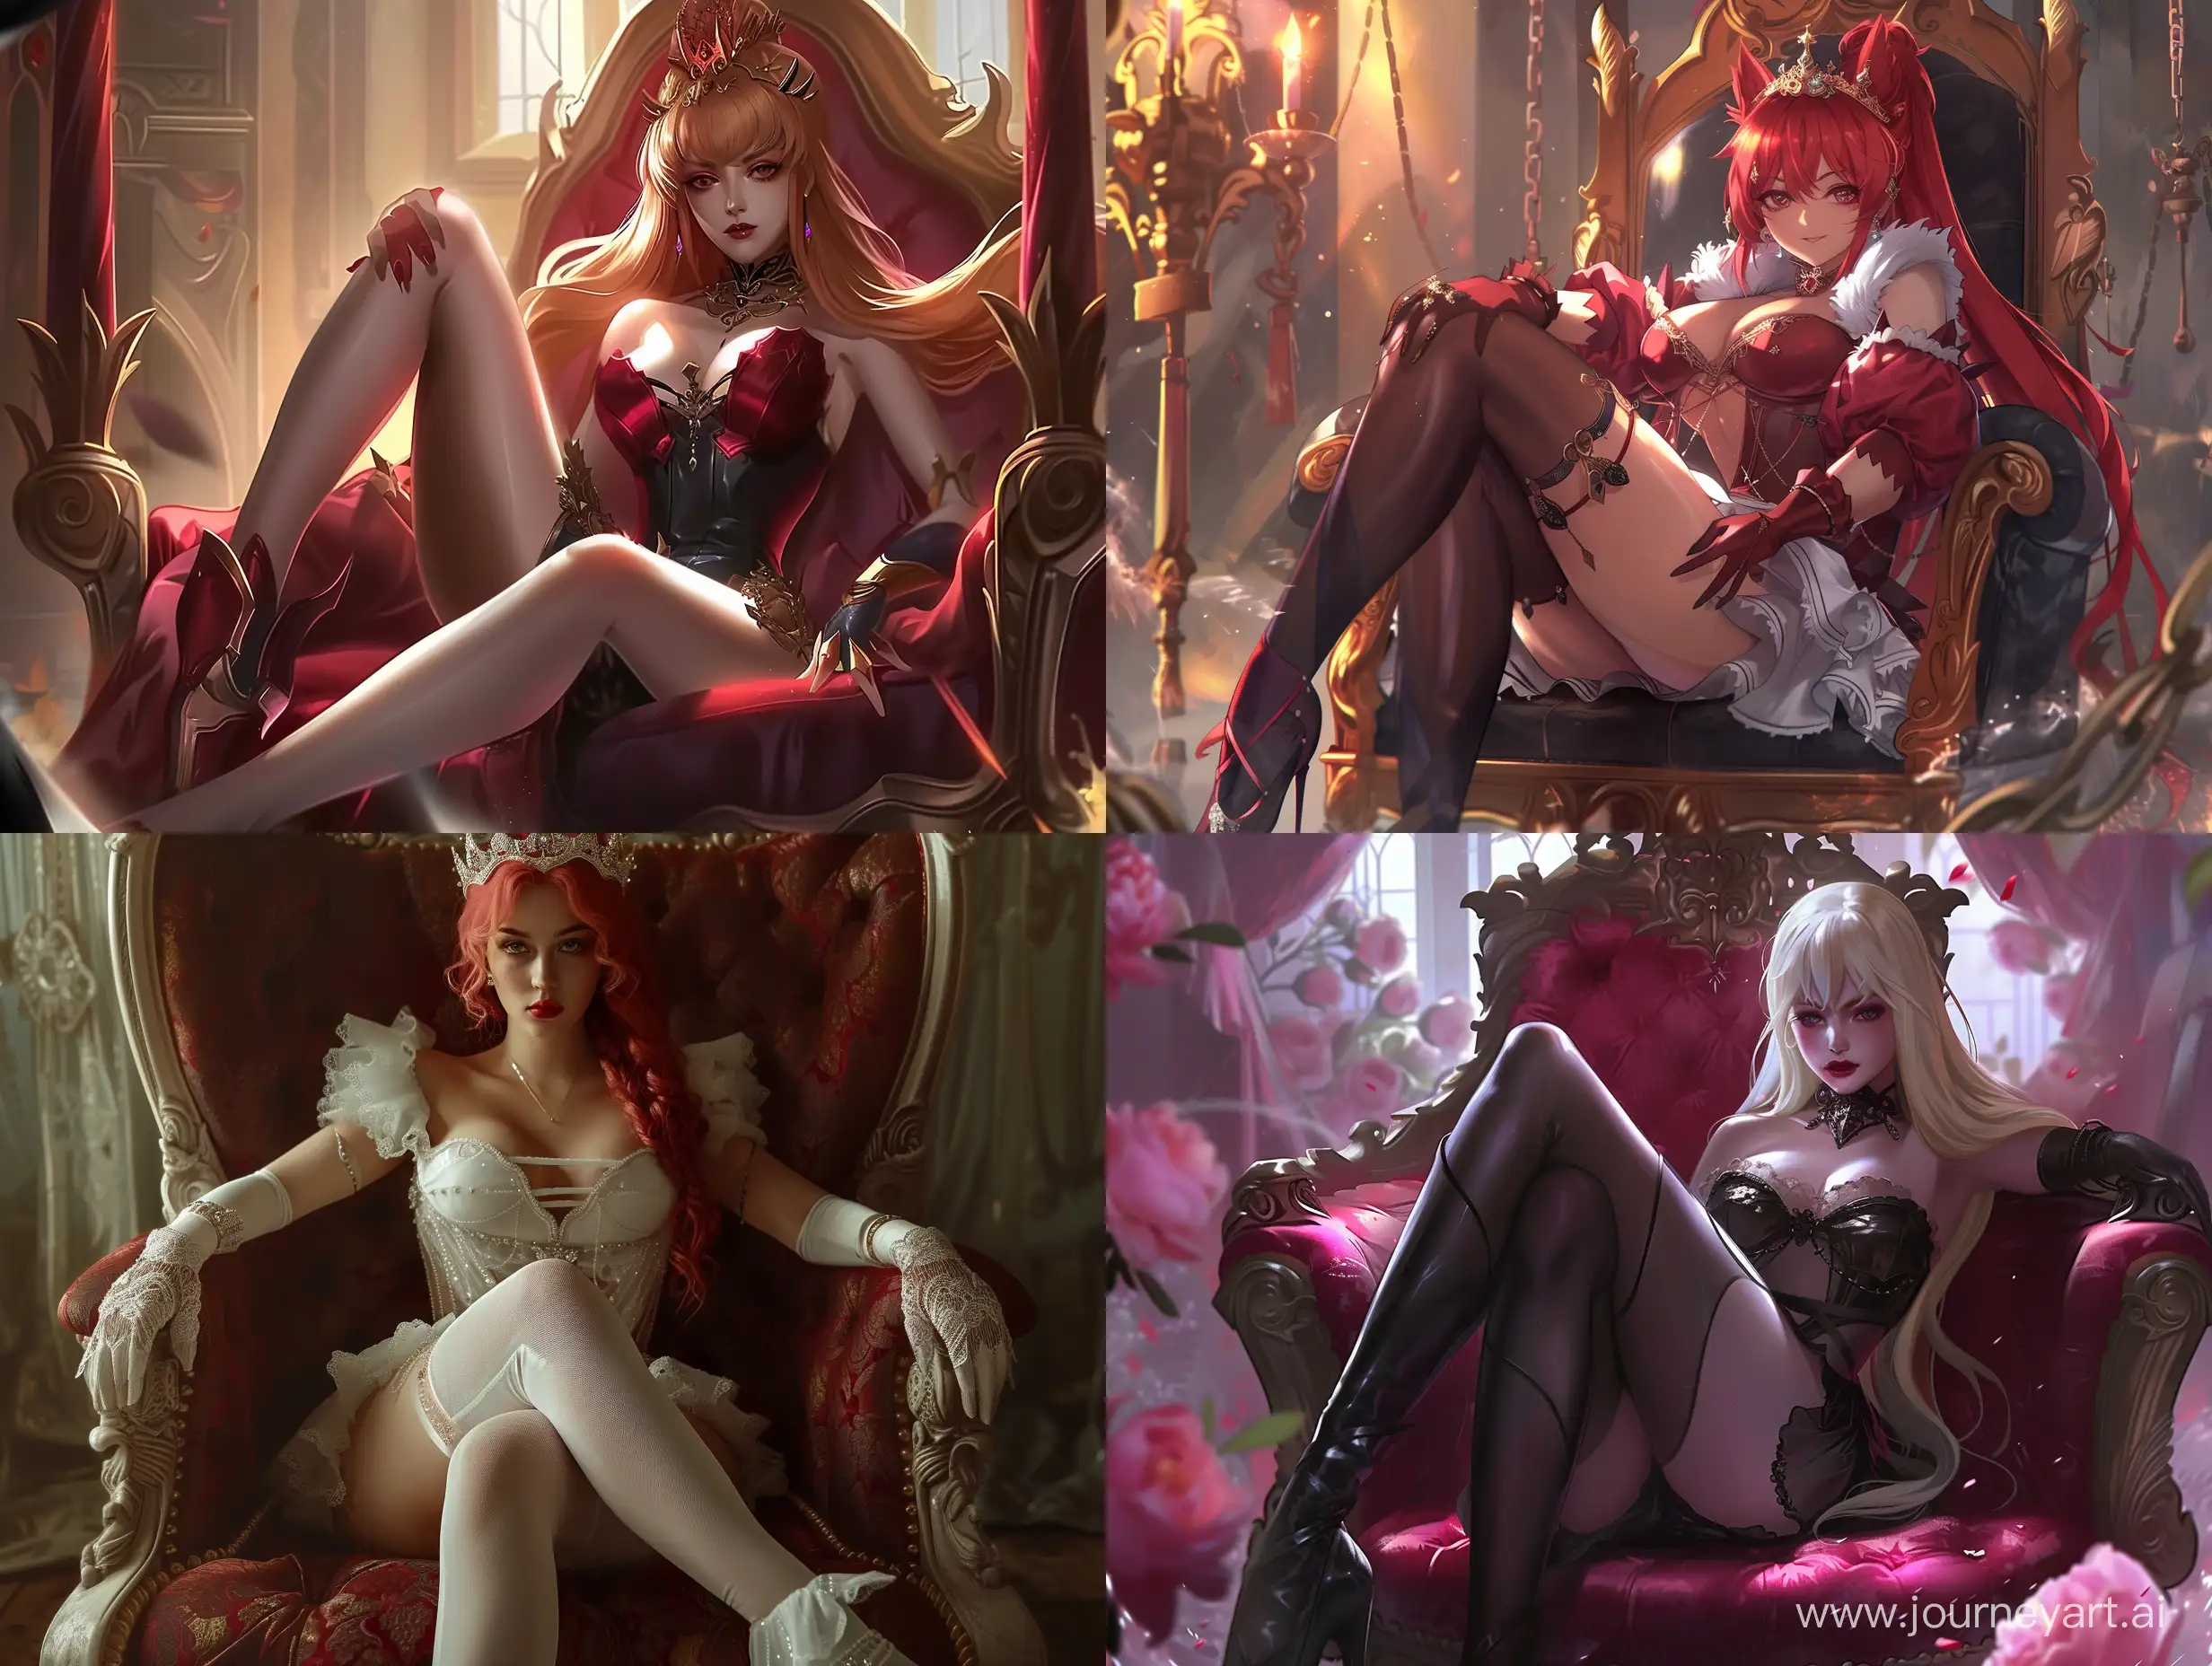 Queen-Rias-Gremory-Posing-with-Crossed-Legs